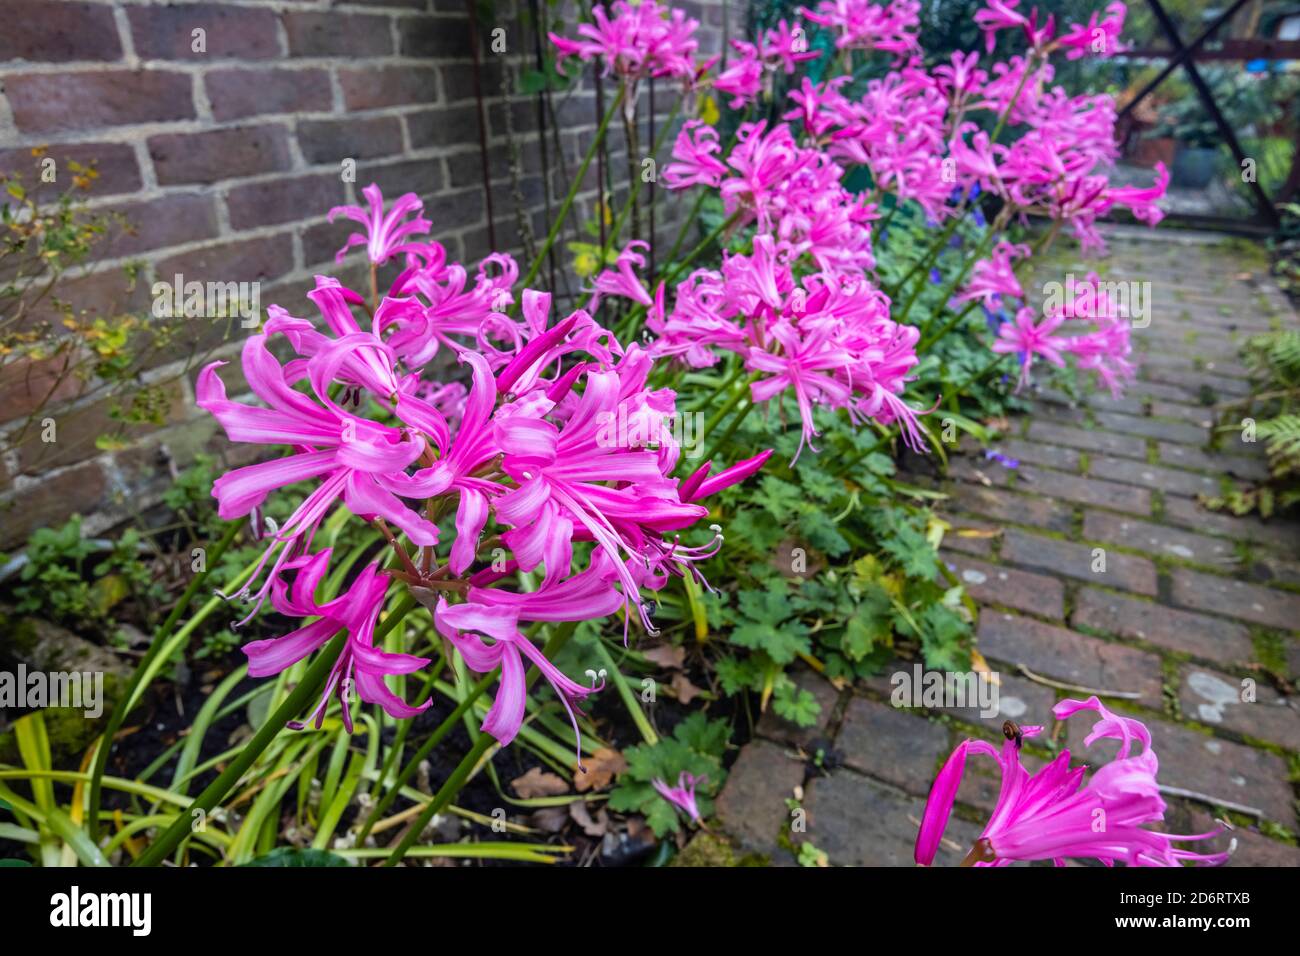 Tall, large bulbous perennial Nerines, Nerine bowdenii, flowering against a wall in a border in a garden in Surrey, south-east England in autumn Stock Photo